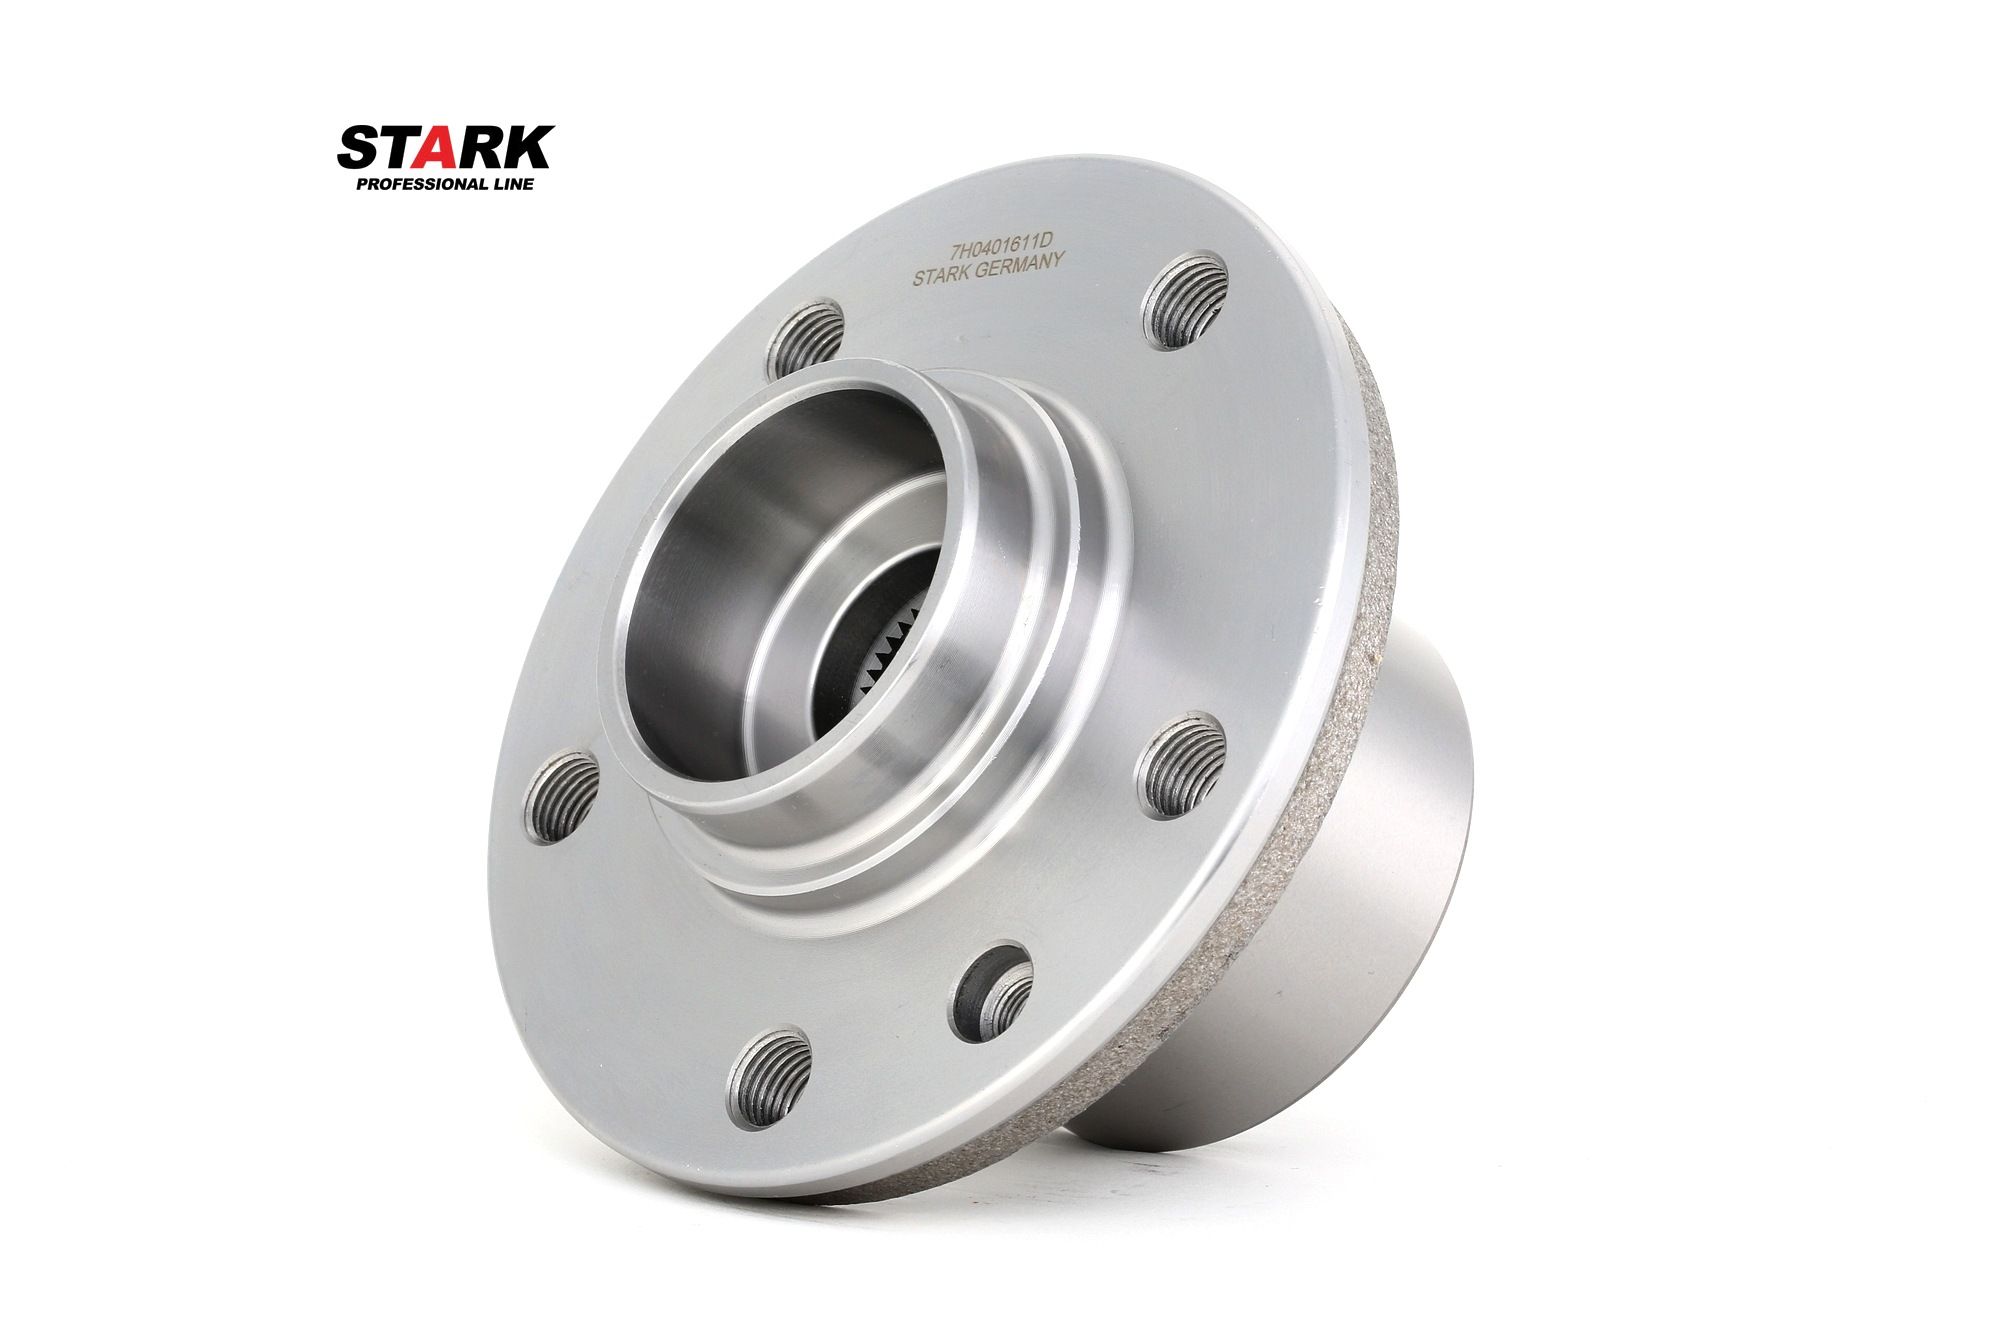 SKWB-0180128 STARK Wheel hub assembly PORSCHE with attachment material, with integrated wheel bearing, with wheel hub, 85 mm, Ball Bearing, Tapered Roller Bearing